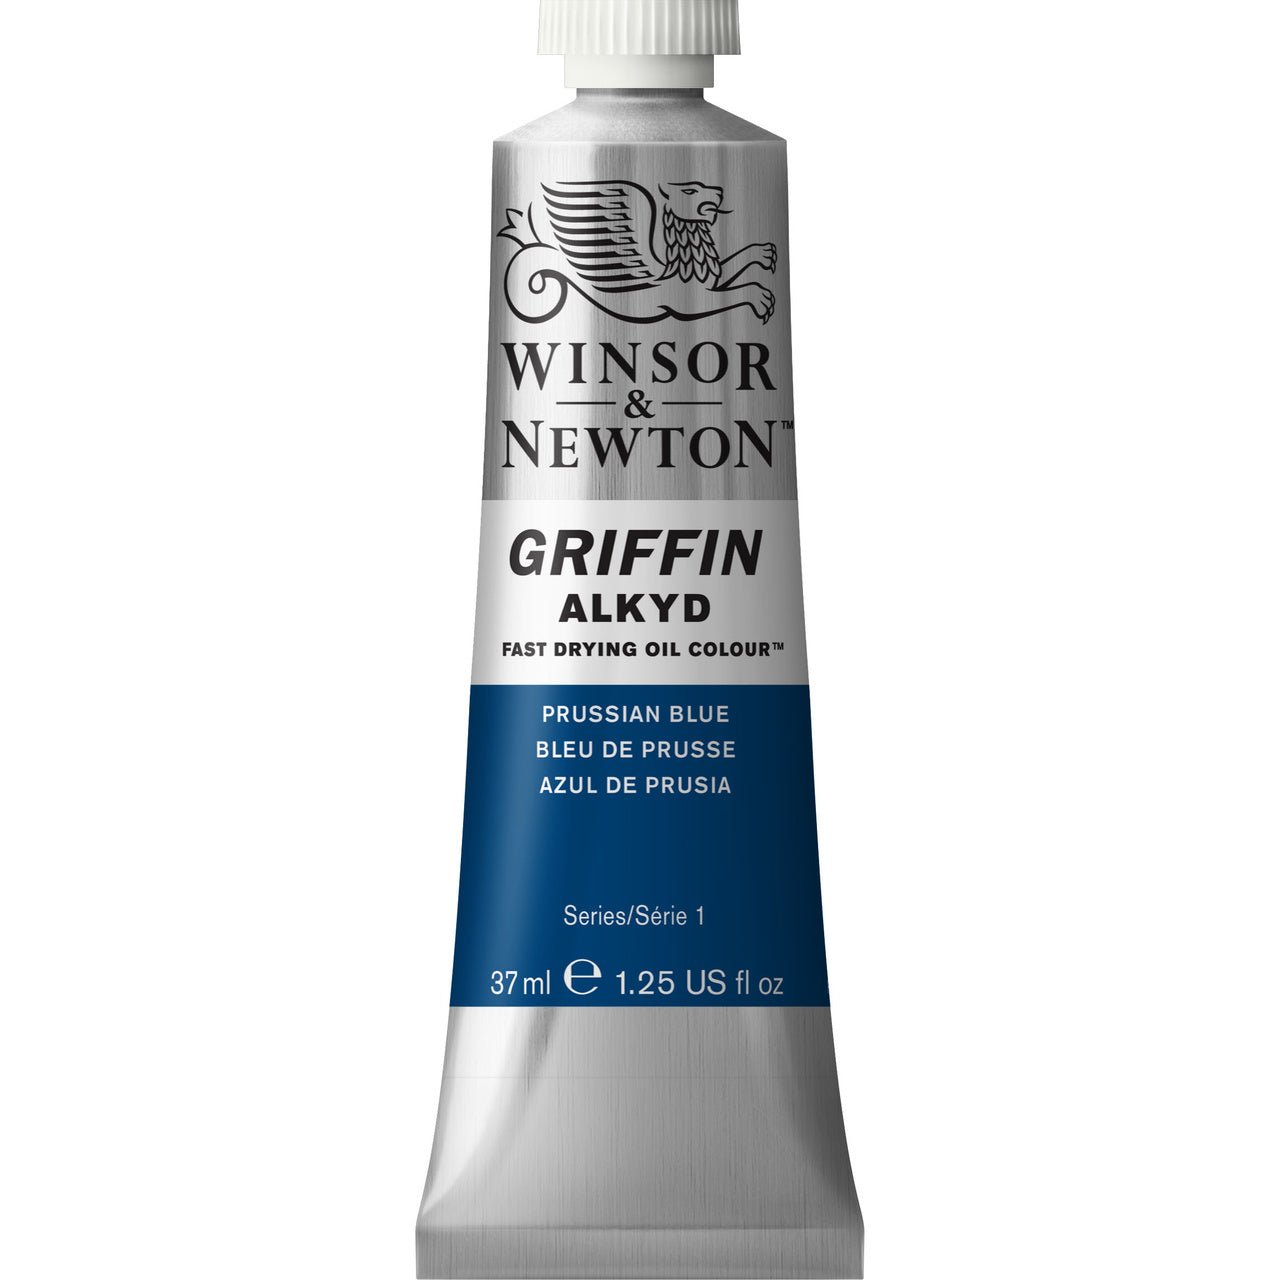 Winsor & Newton Griffin Alkyd 37ml Prussian Blue - merriartist.com